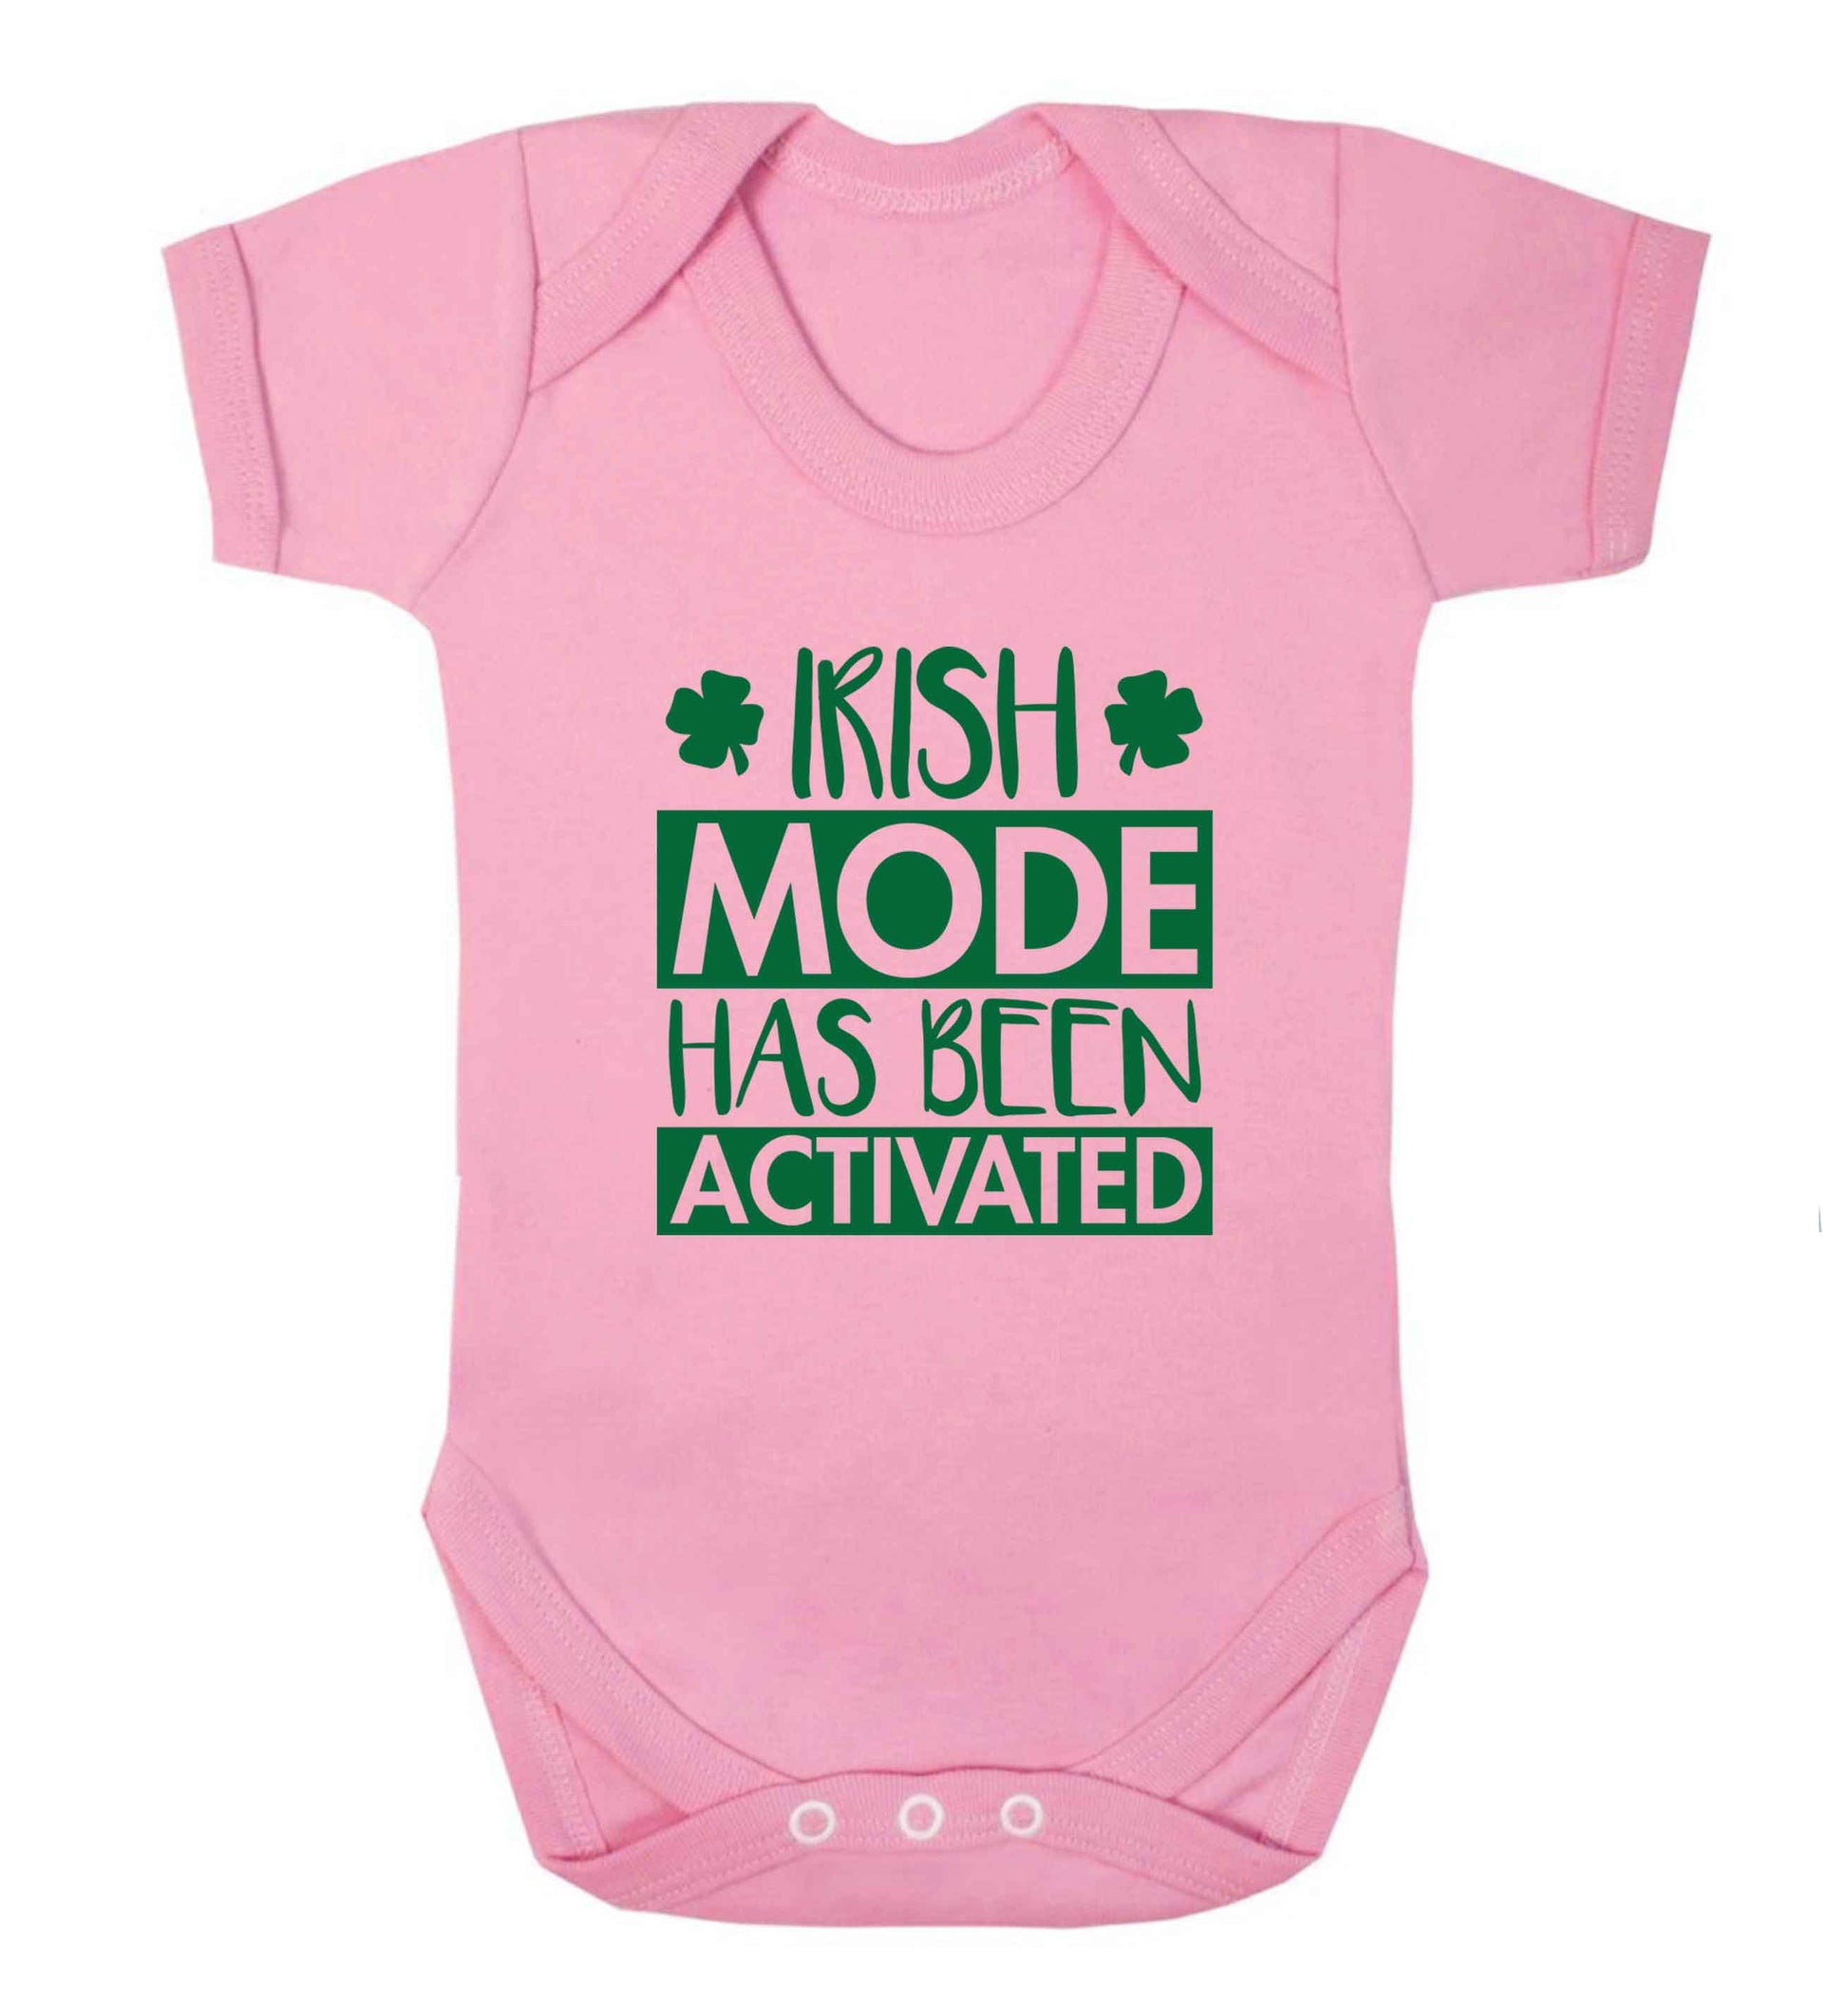 Irish mode has been activated baby vest pale pink 18-24 months